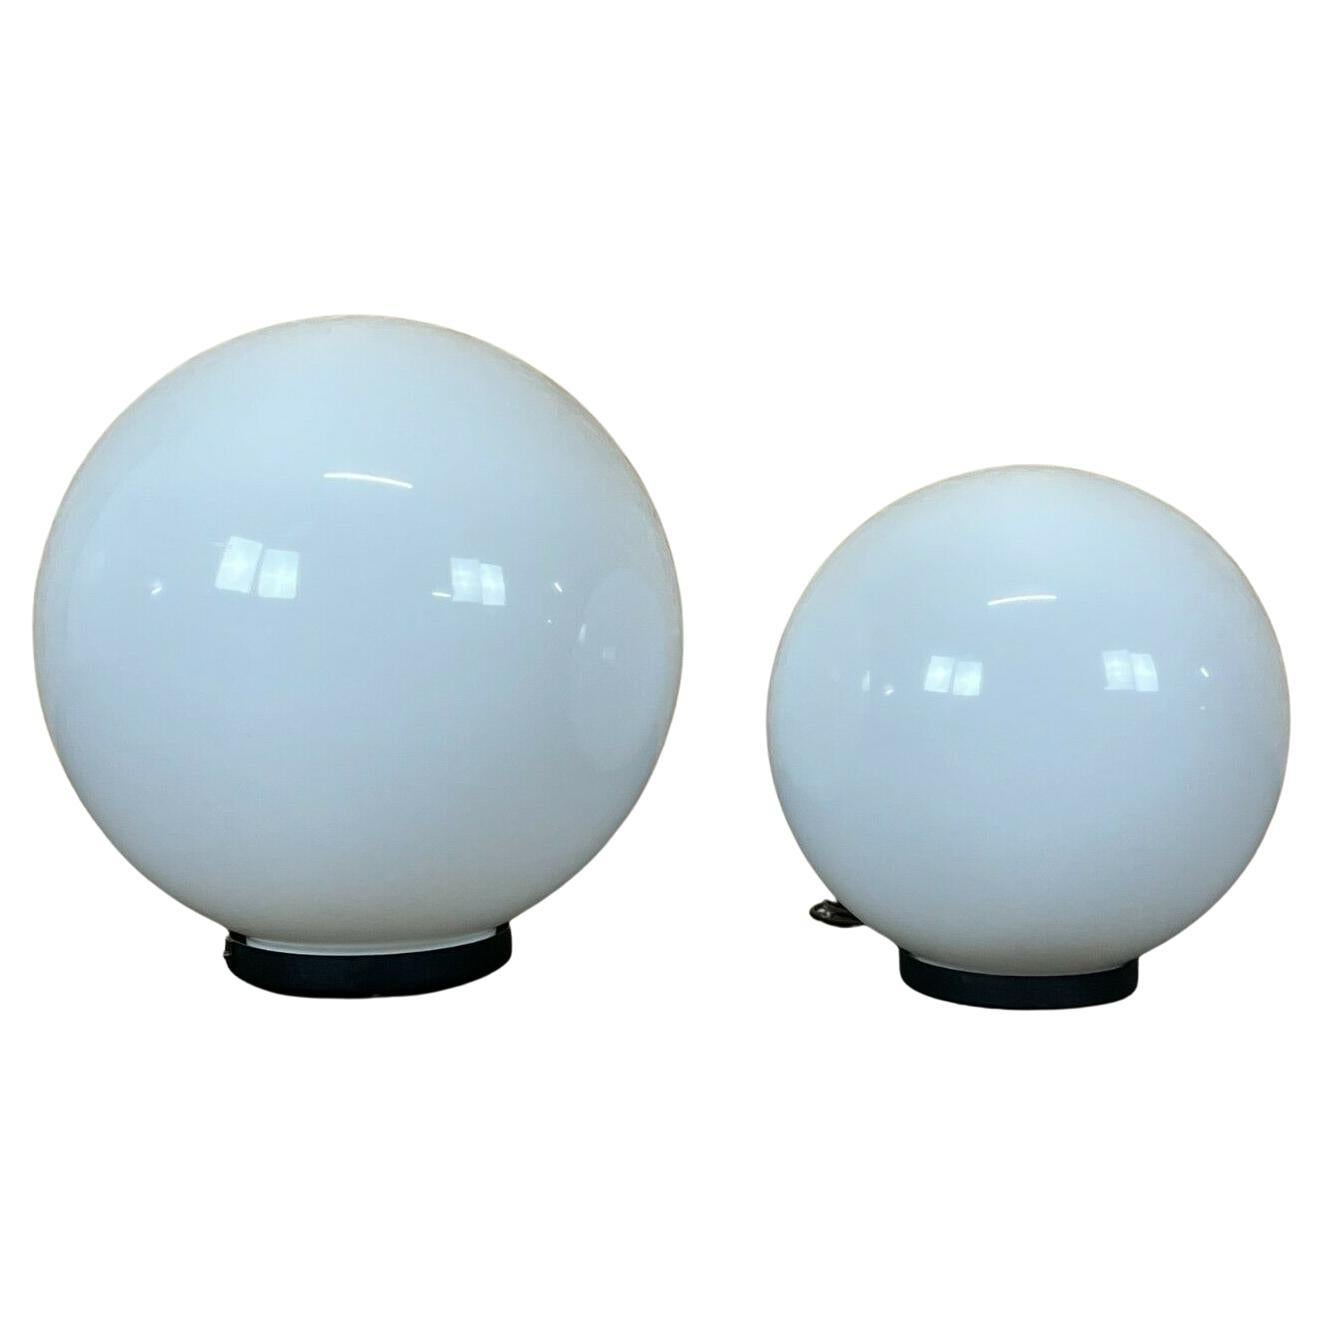 2x 60s 70s Ball and Ball Ball Lamp Lampadaire Acrilico Pmma Made in Italy Design/One 60s